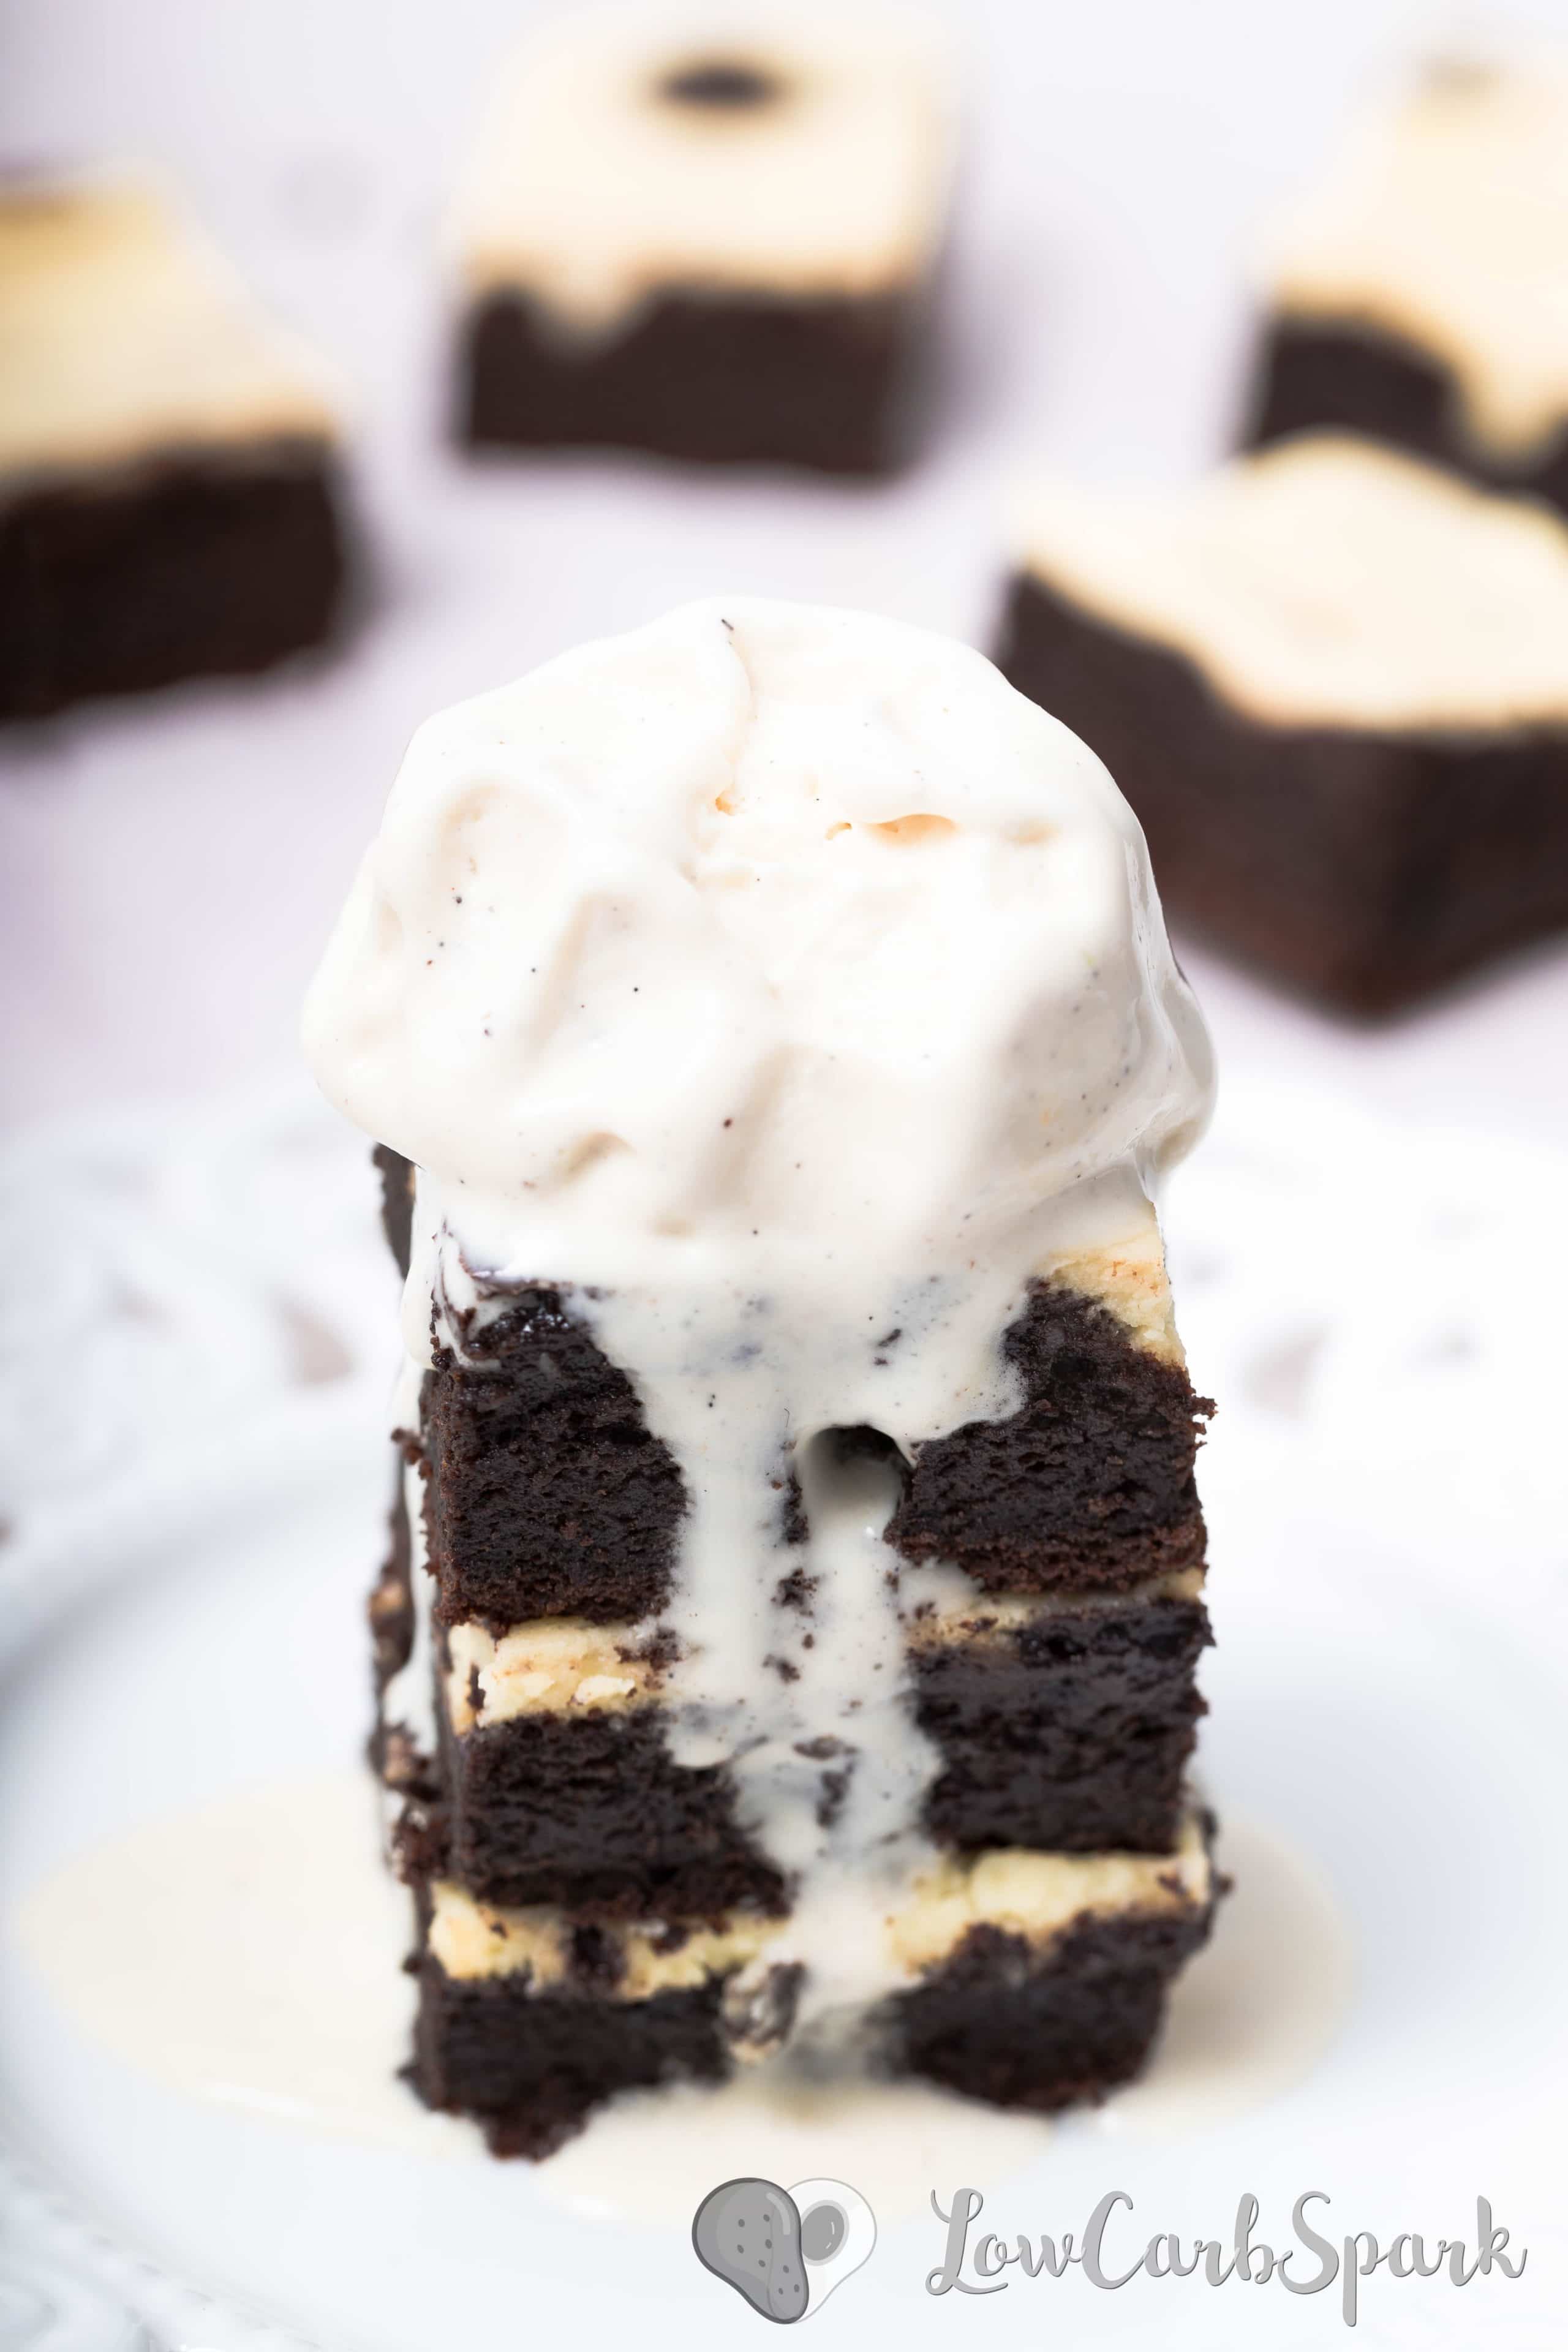 These Keto Cheesecake Brownies are the most delicious invention ever. Each square is insanely chocolatey, rich, fudgy and perfectly paired with a creamy cheesecake filling. And for only 1.5g carbs I think we have a pretty good deal!